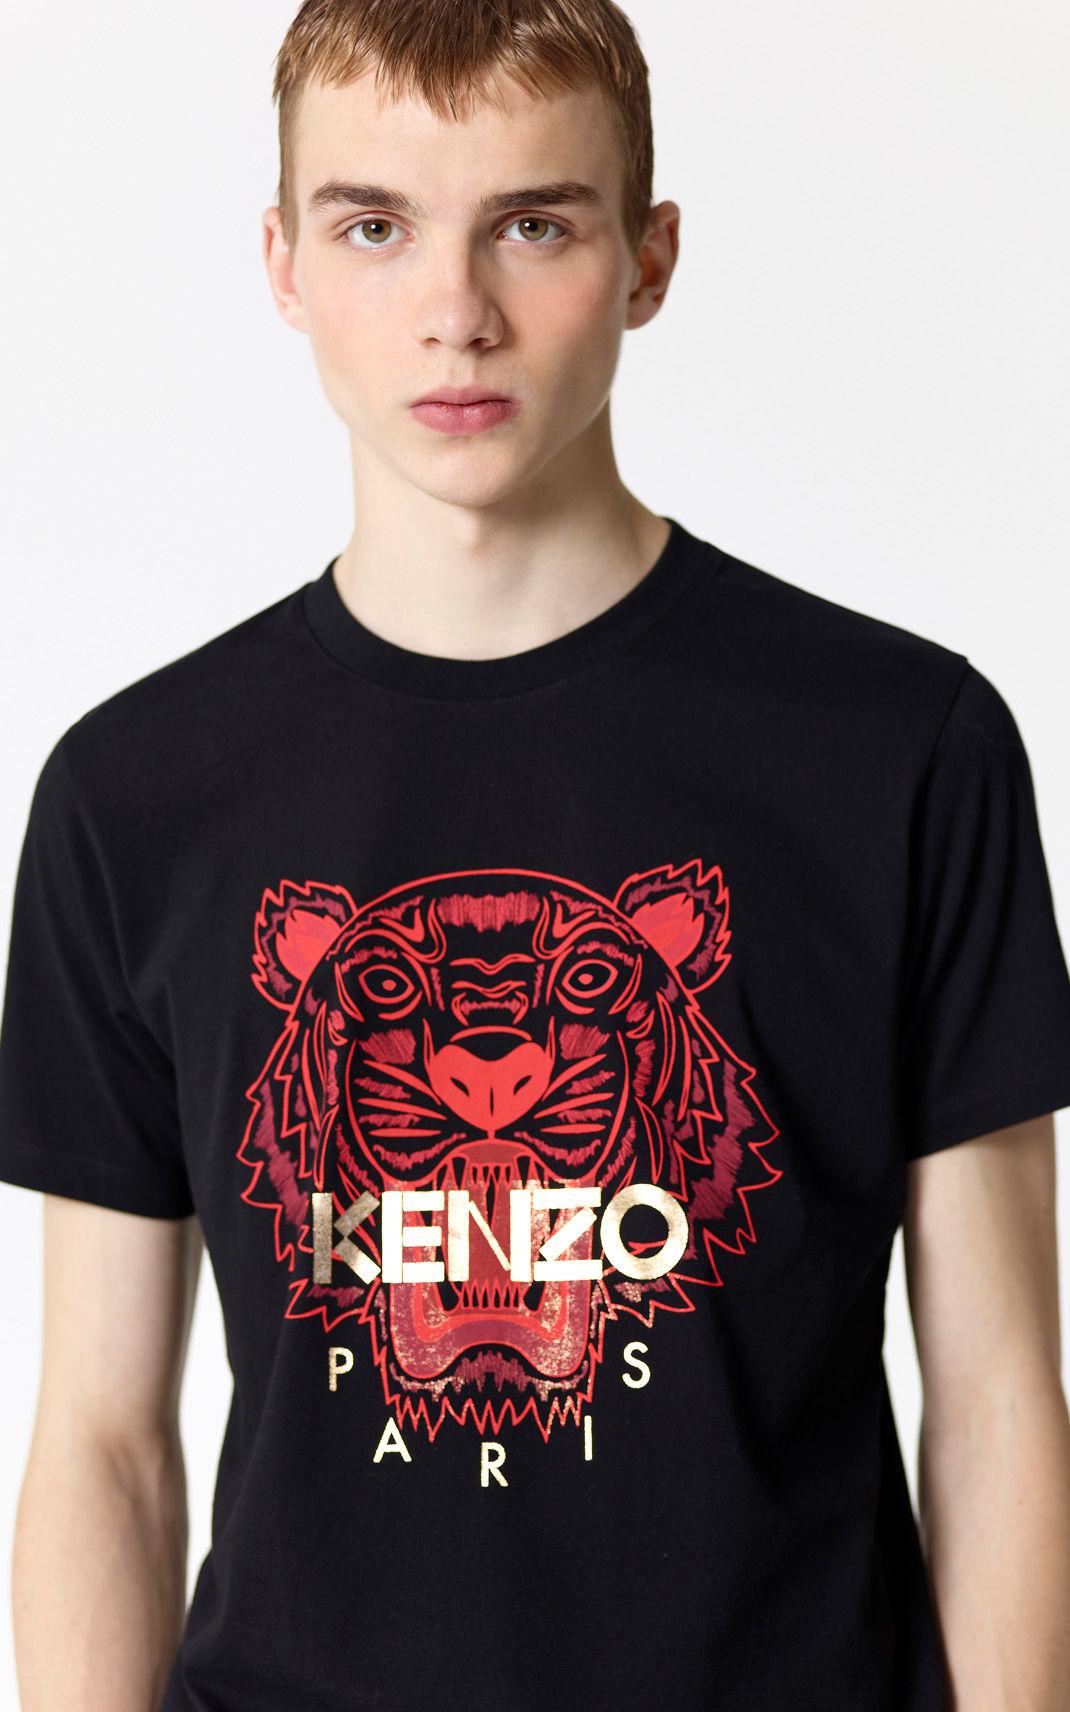 Usa pakistan kenzo t shirt eye black out online, Black distressed skinny jeans womens, high waisted jeans size 16. 